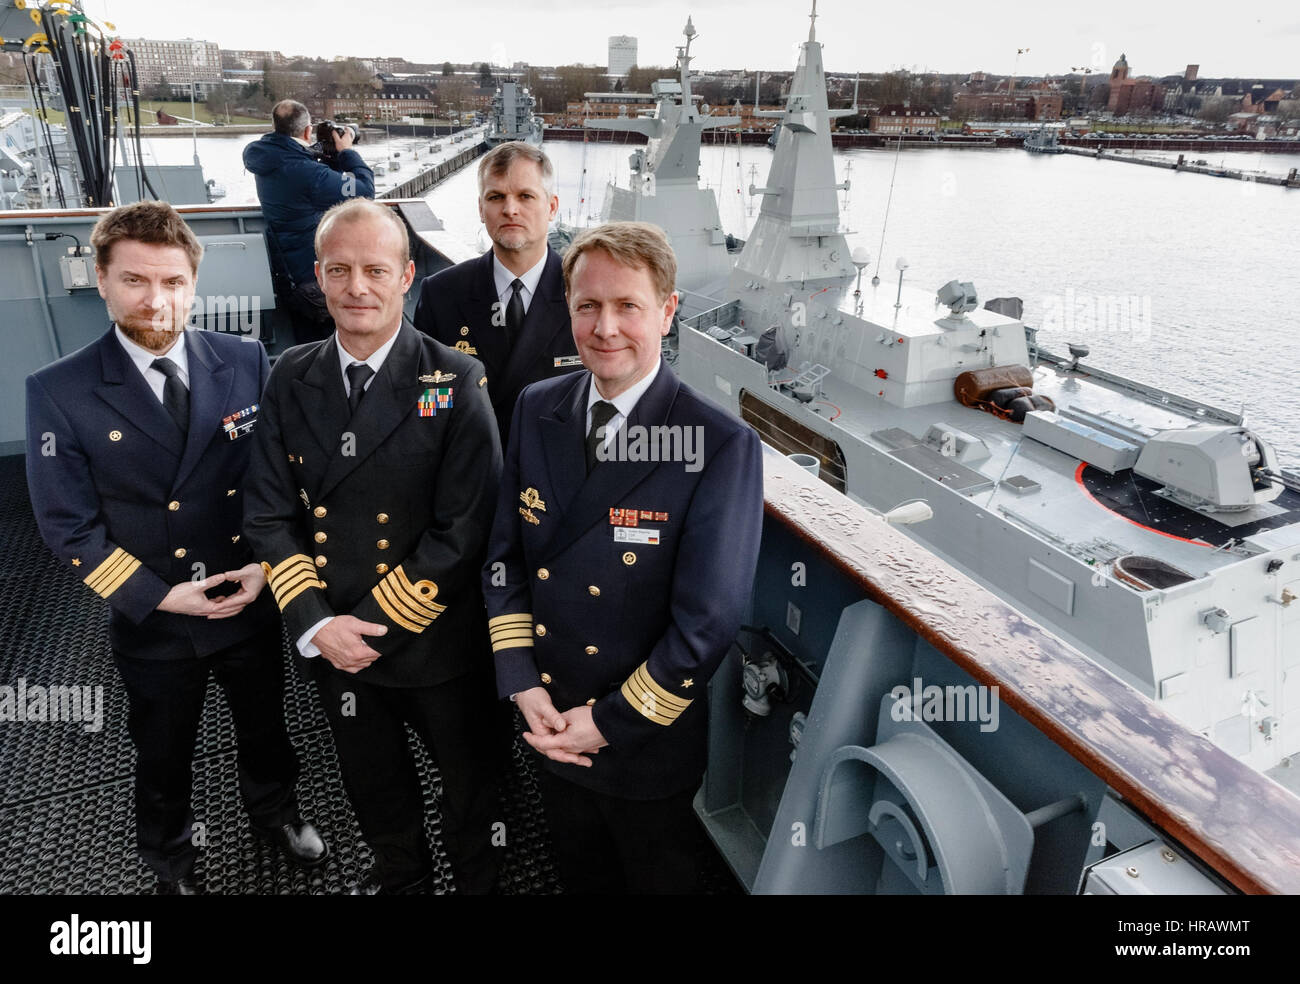 Kiel, Germany. 28th Feb, 2017. Marco Taedcke (l-r), the captain of the German frigate Augsburg, Francois Roux, captain of the South African frigate Amatola, Jobst Berg, captain of the German auxiliary ship Bonn and Volker Herbert Blasche, task for director of the Good Hope VII naval exercise on the Bonn in the harbour of Kiel, Germany, 28 February 2017. The joint German-South African naval war game in the Baltic Sea will conclude on the 13.03.17. Photo: Markus Scholz/dpa/Alamy Live News Stock Photo